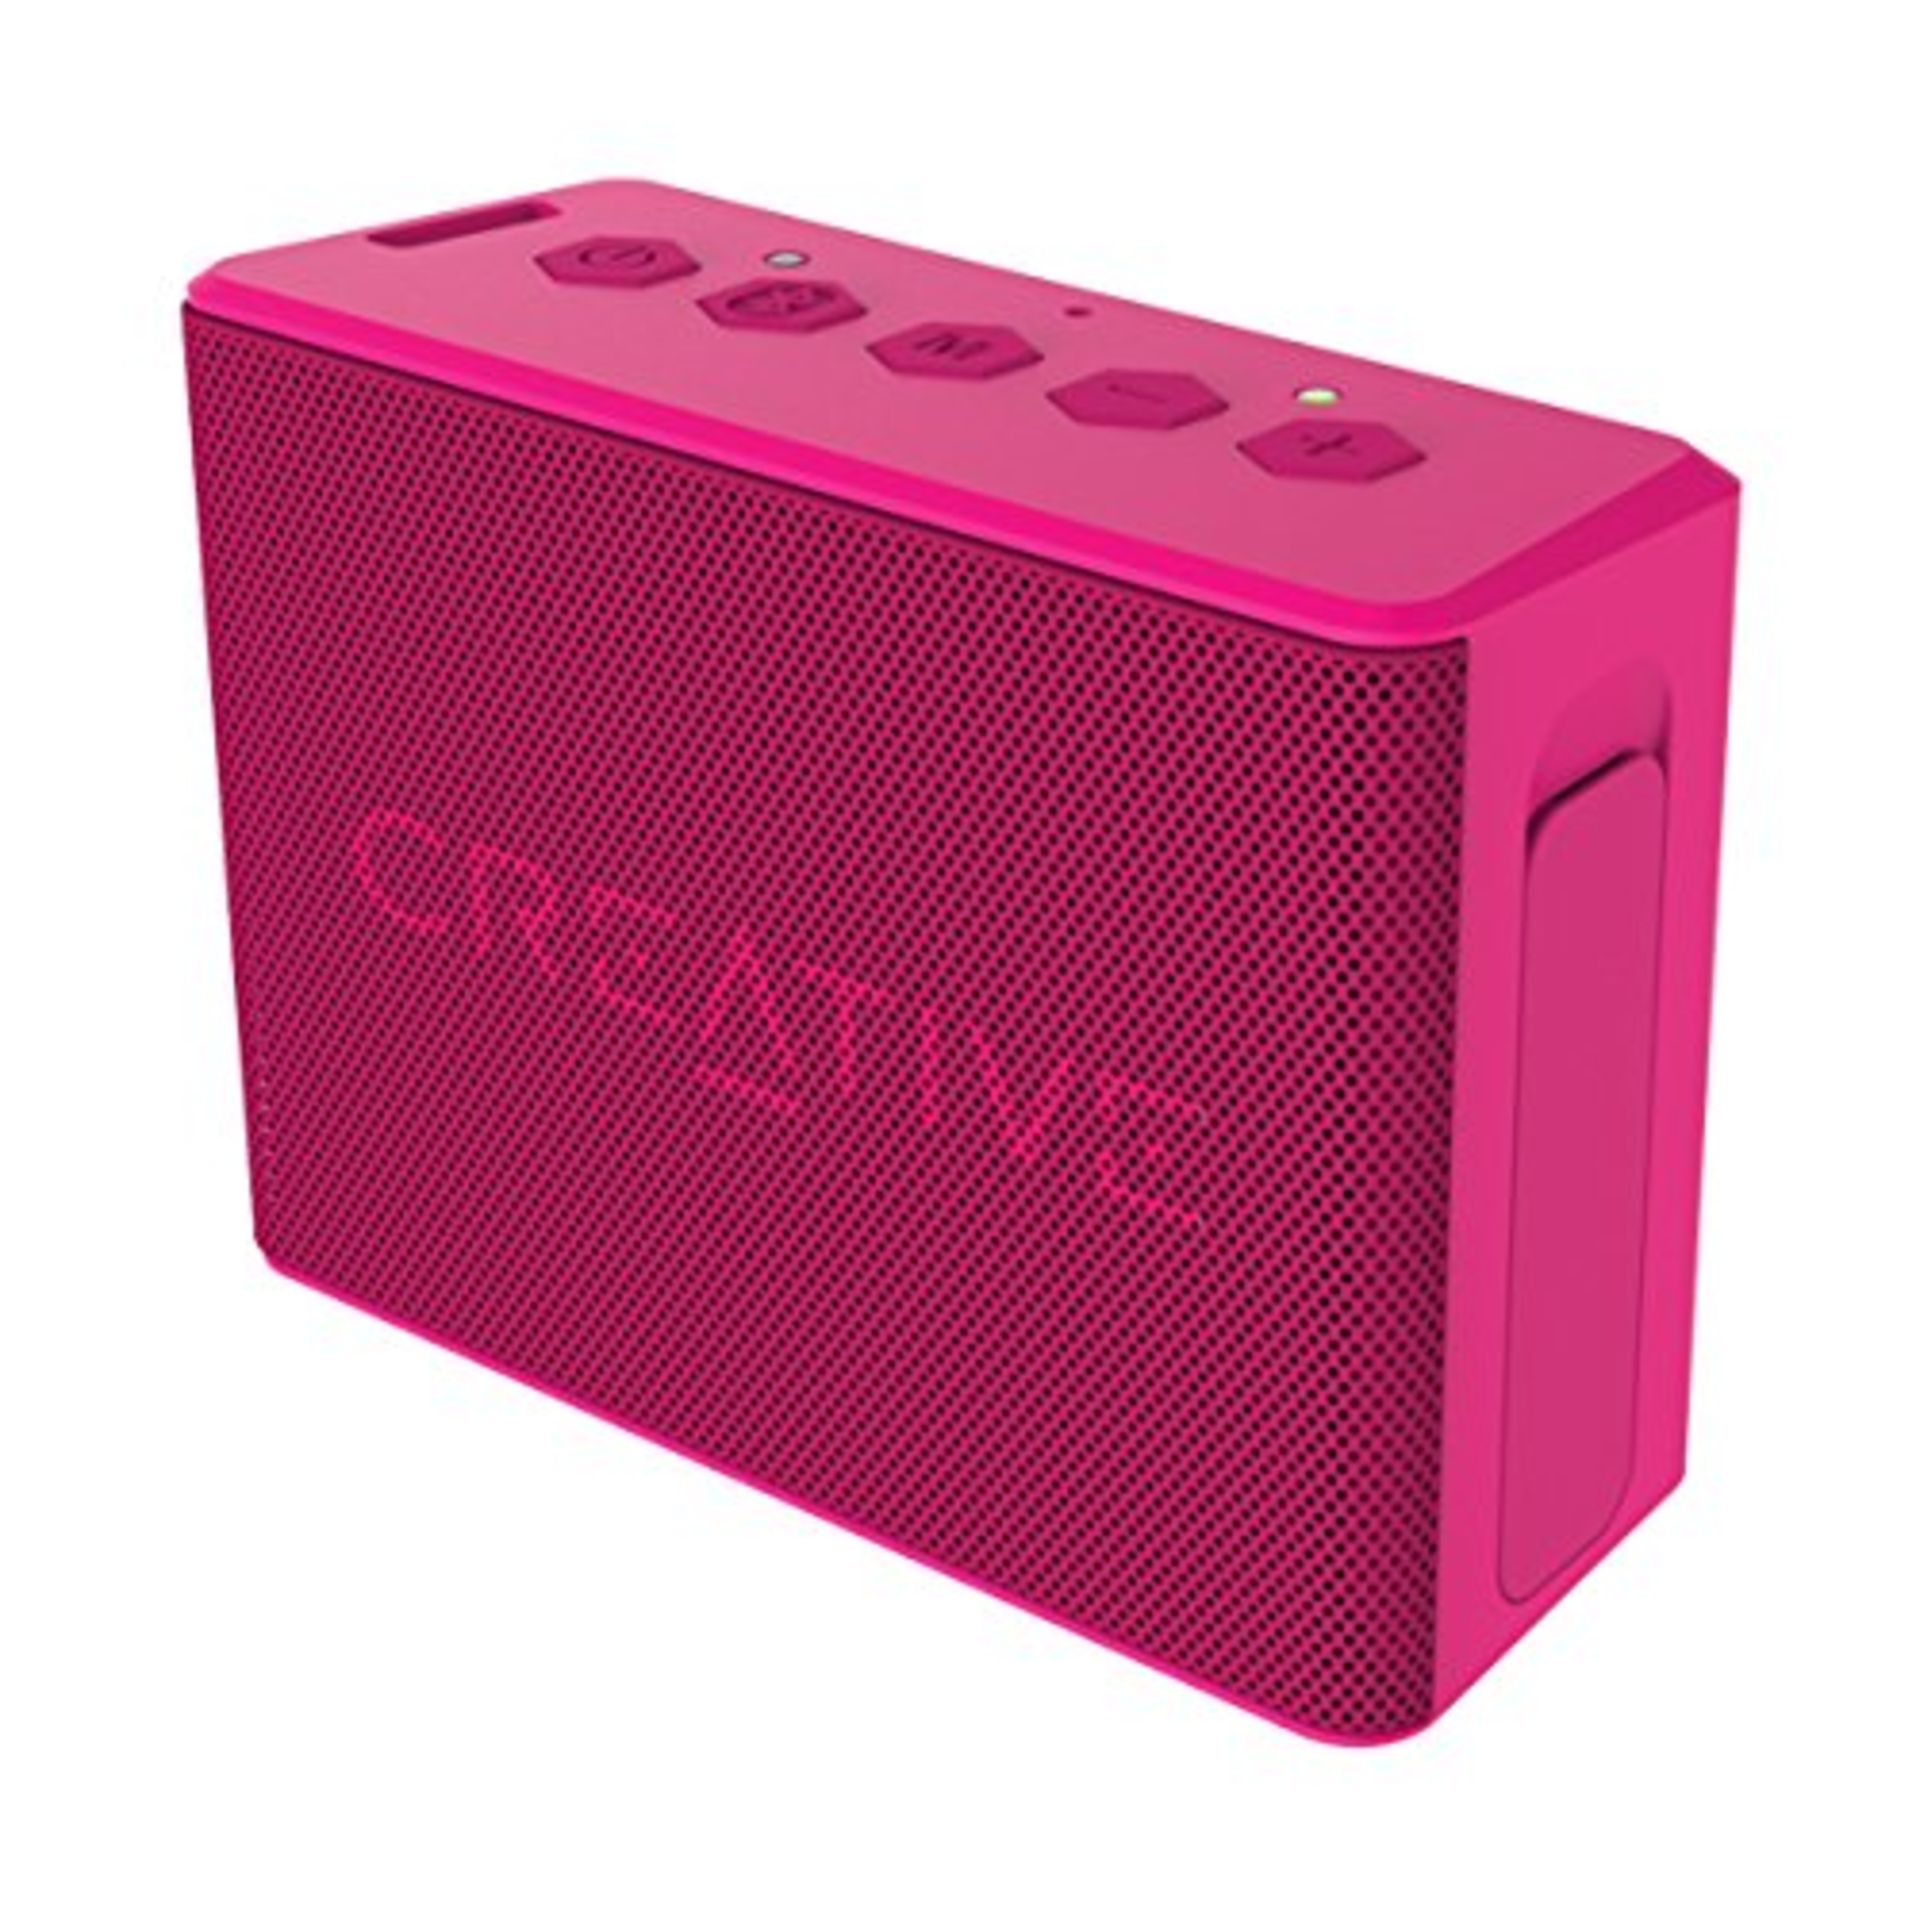 Creative MUVO 2c Palm Sized Water Resistant Bluetooth Speaker with Built-In MP3 Player